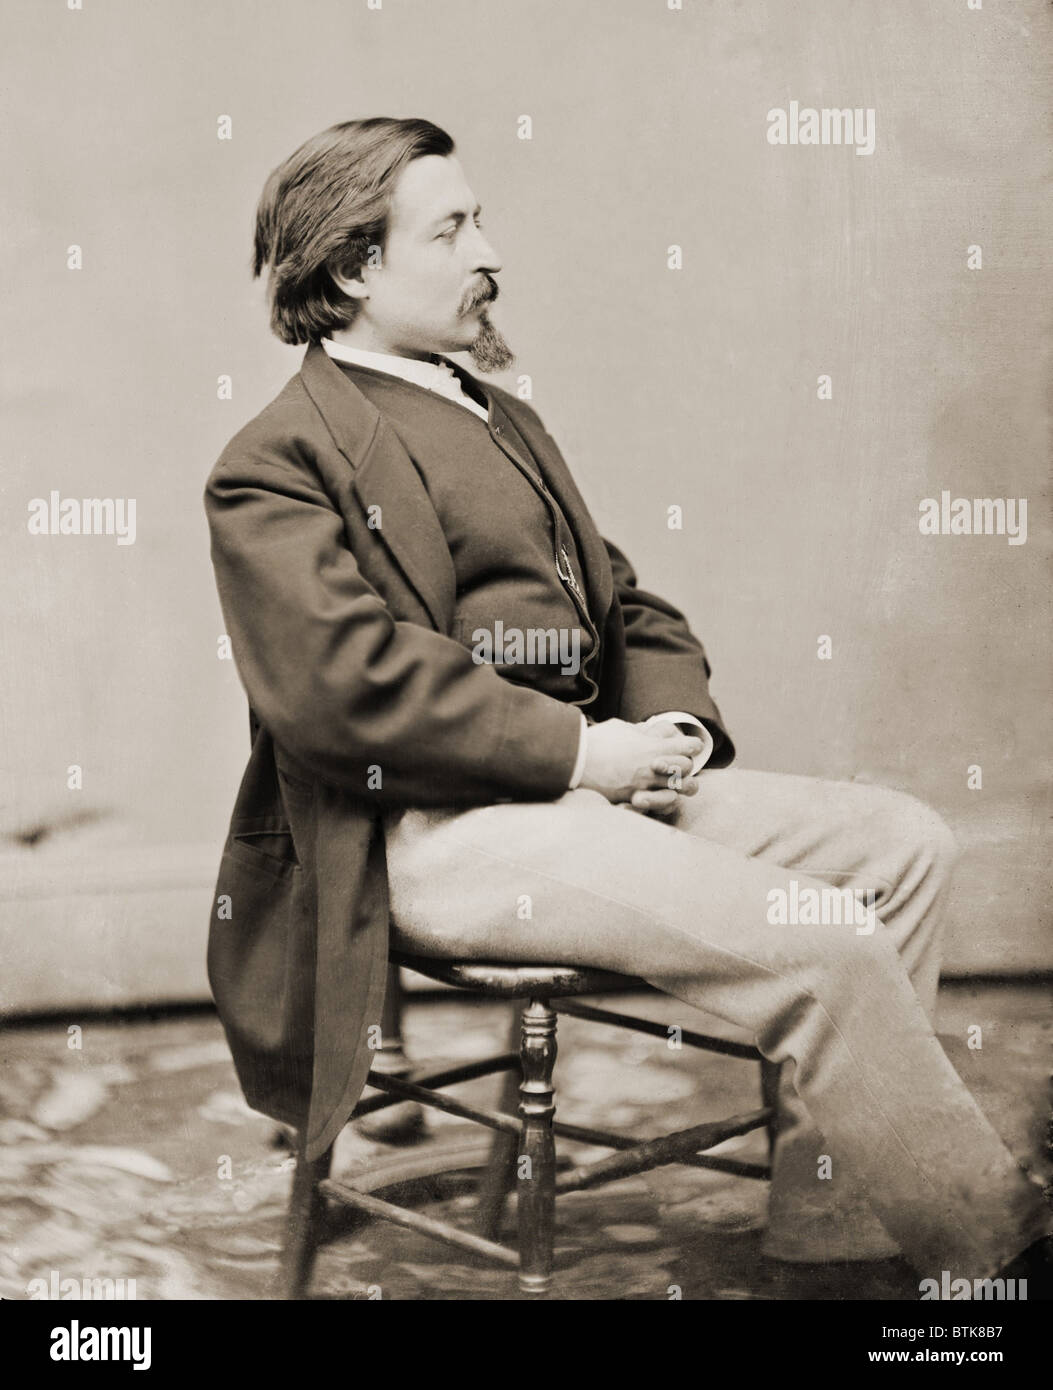 Thomas Nast (1840-1902), created cartoons for HARPER'S WEEKLY from 1858-1886, about Civil War and Reconstruction politics, and the corruption of the Tweed Ring in New York. 1868 Brady Studio photo. Stock Photo